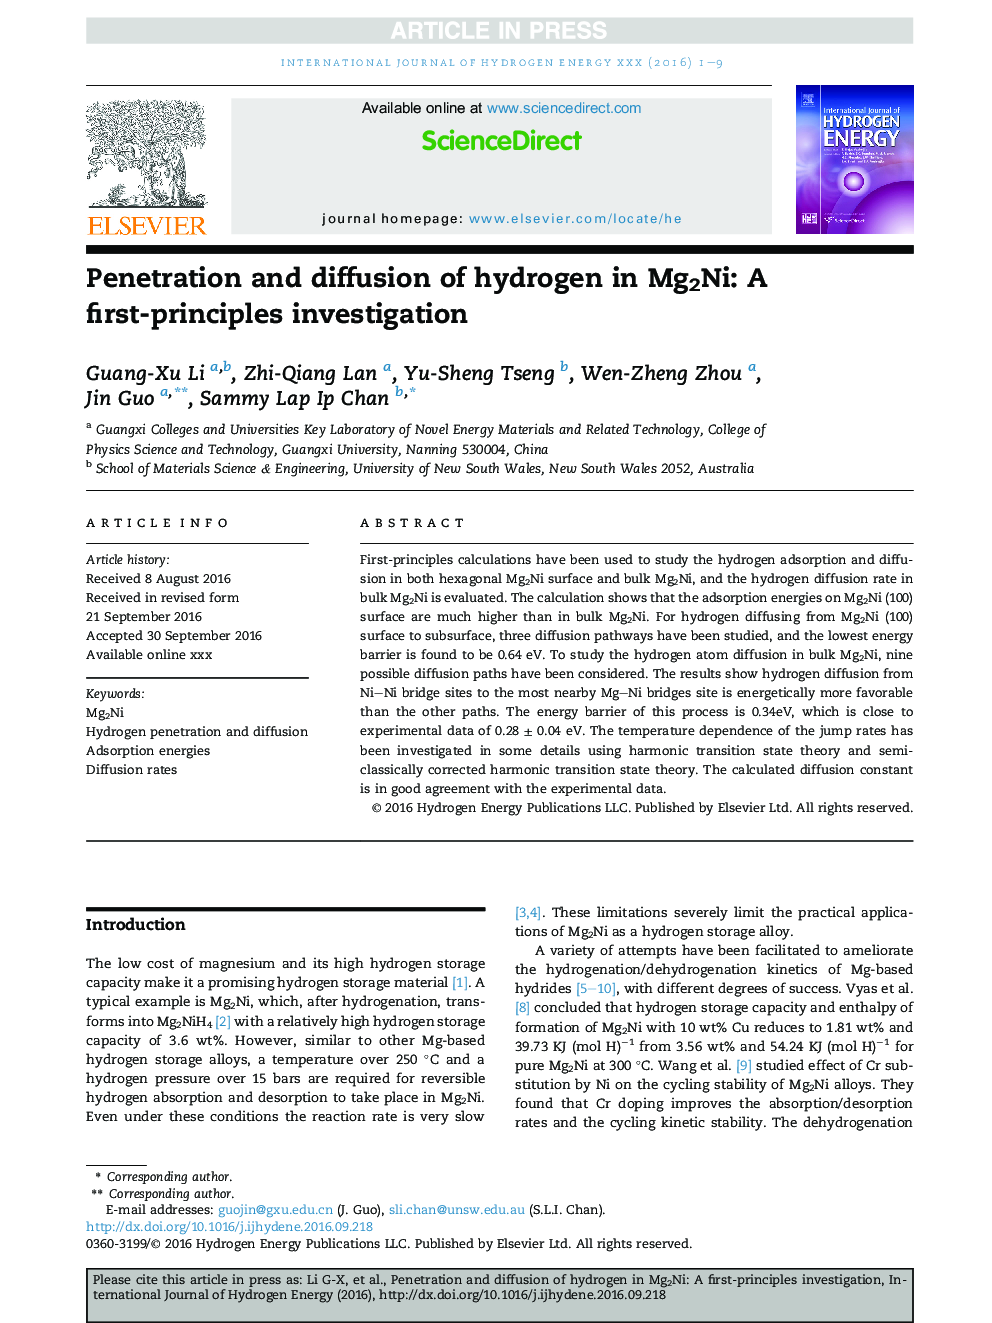 Penetration and diffusion of hydrogen in Mg2Ni: A first-principles investigation